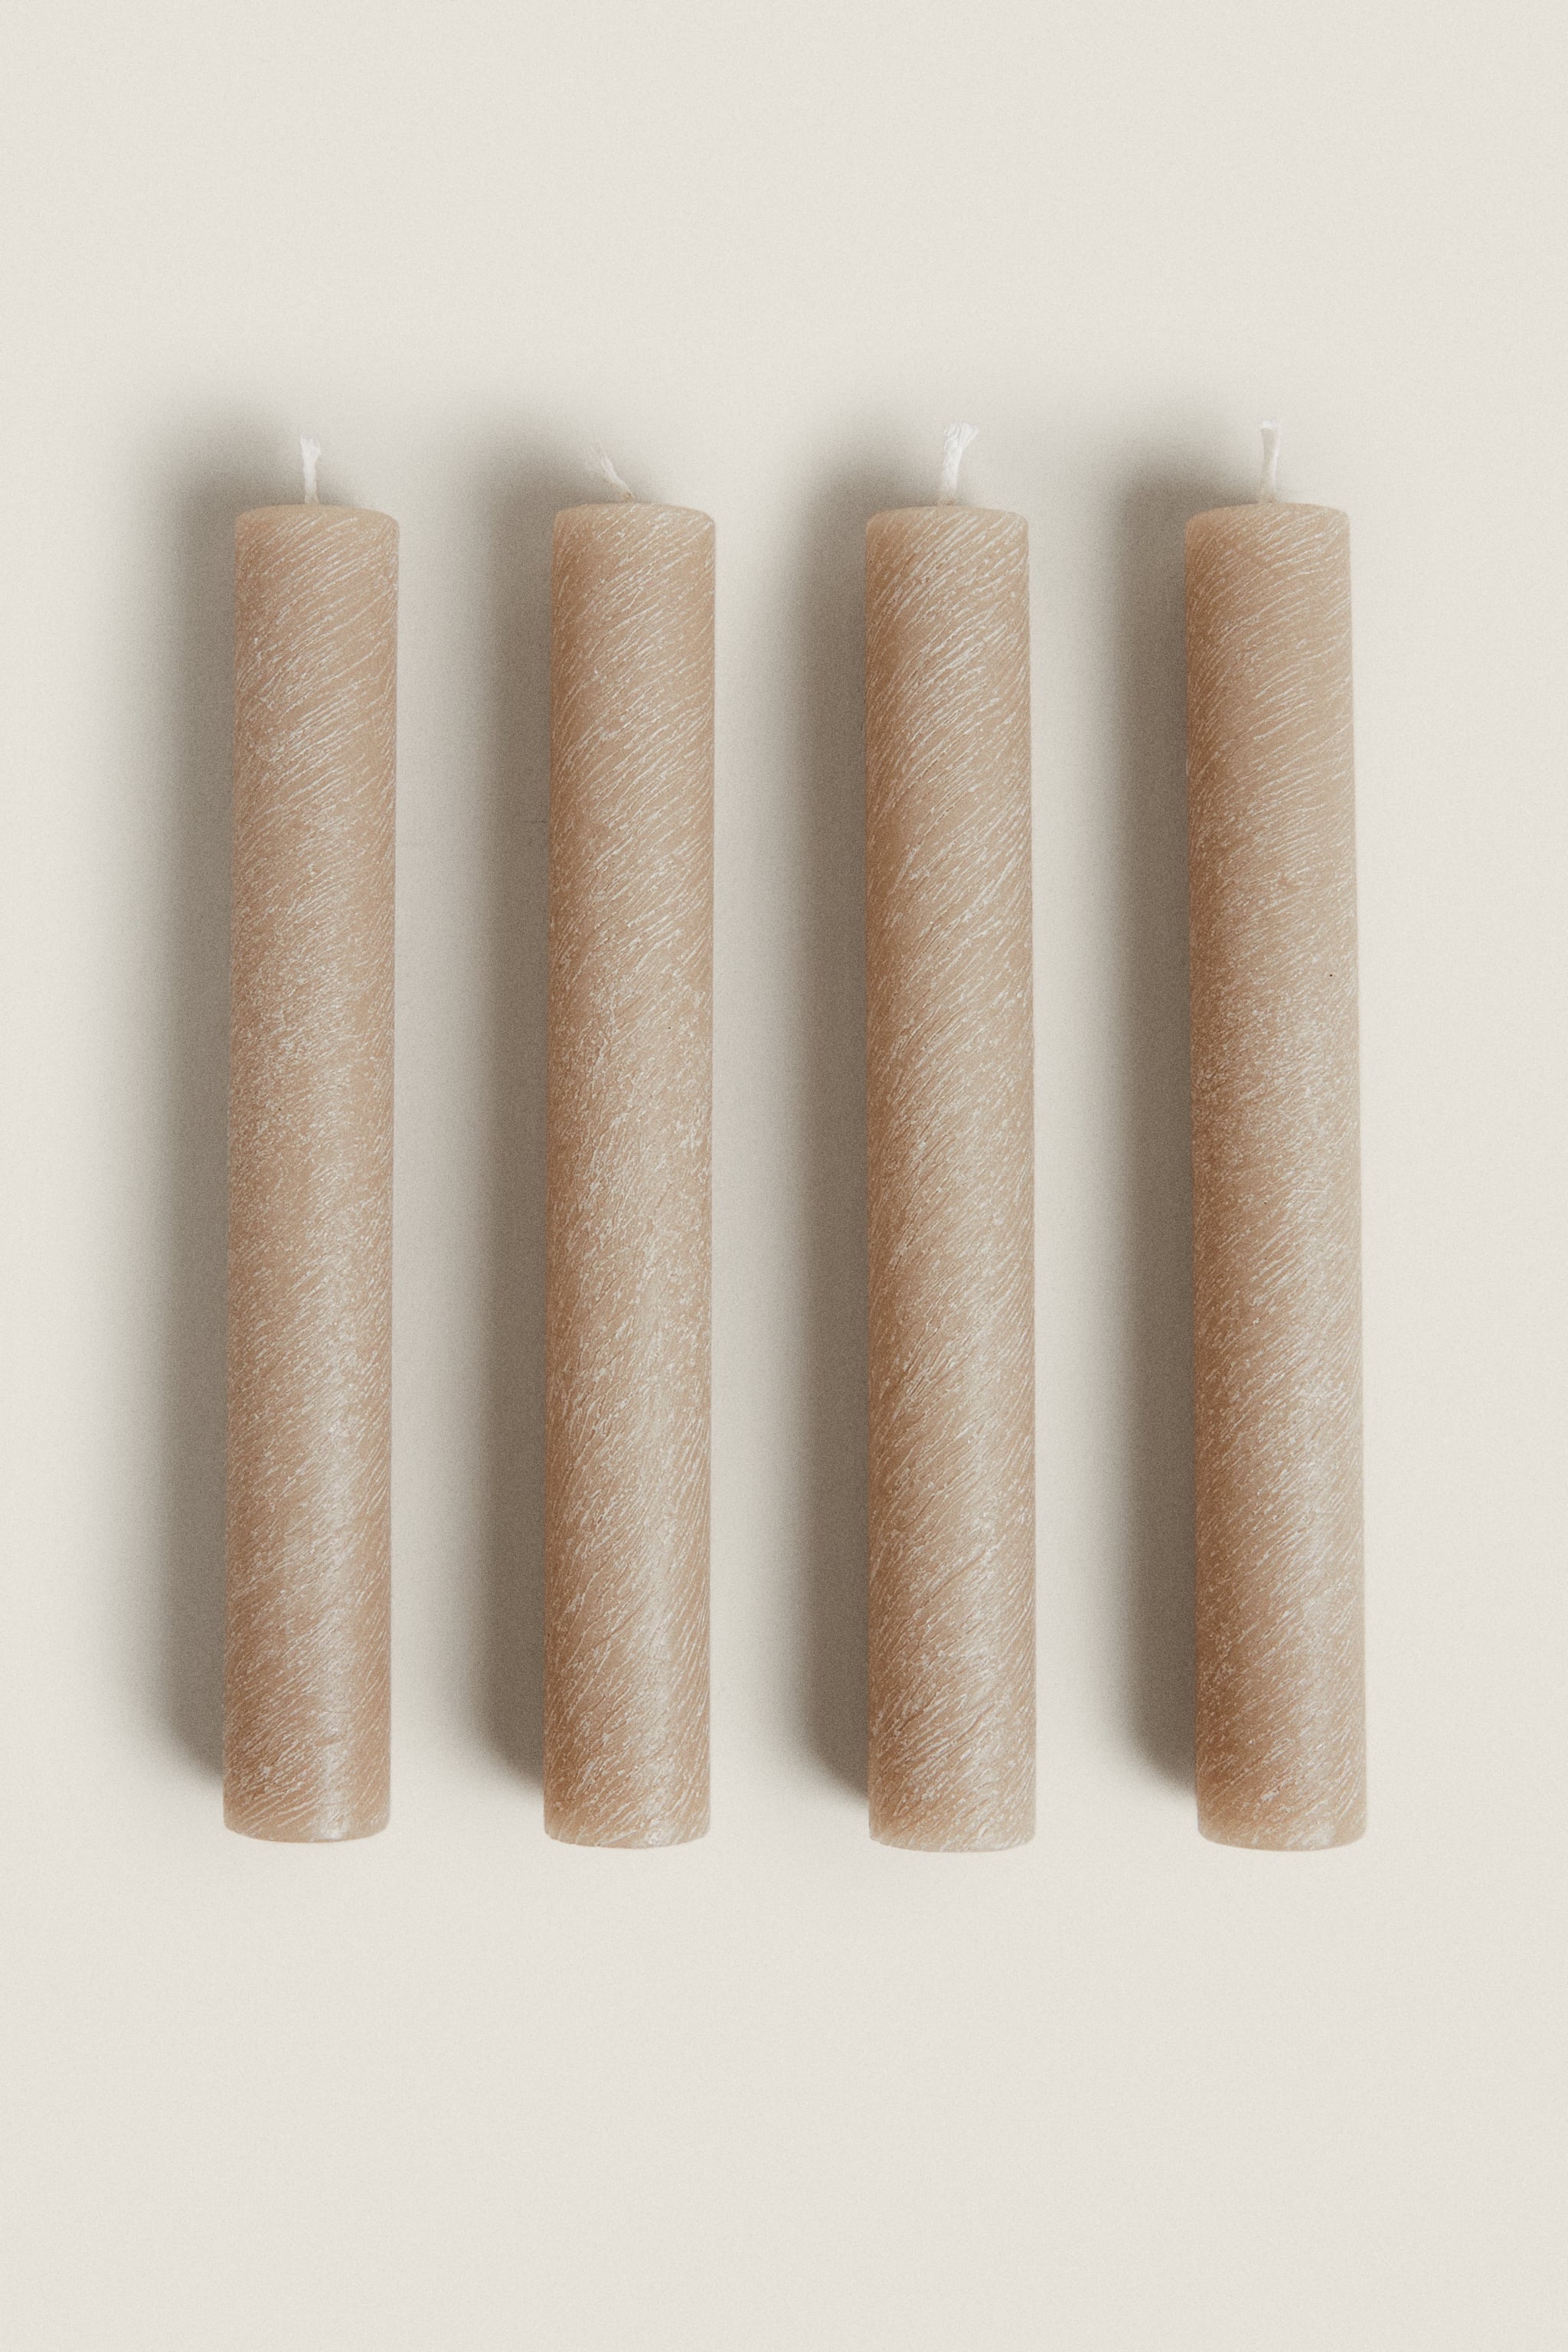 PLAIN CANDLE (PACK OF 4)